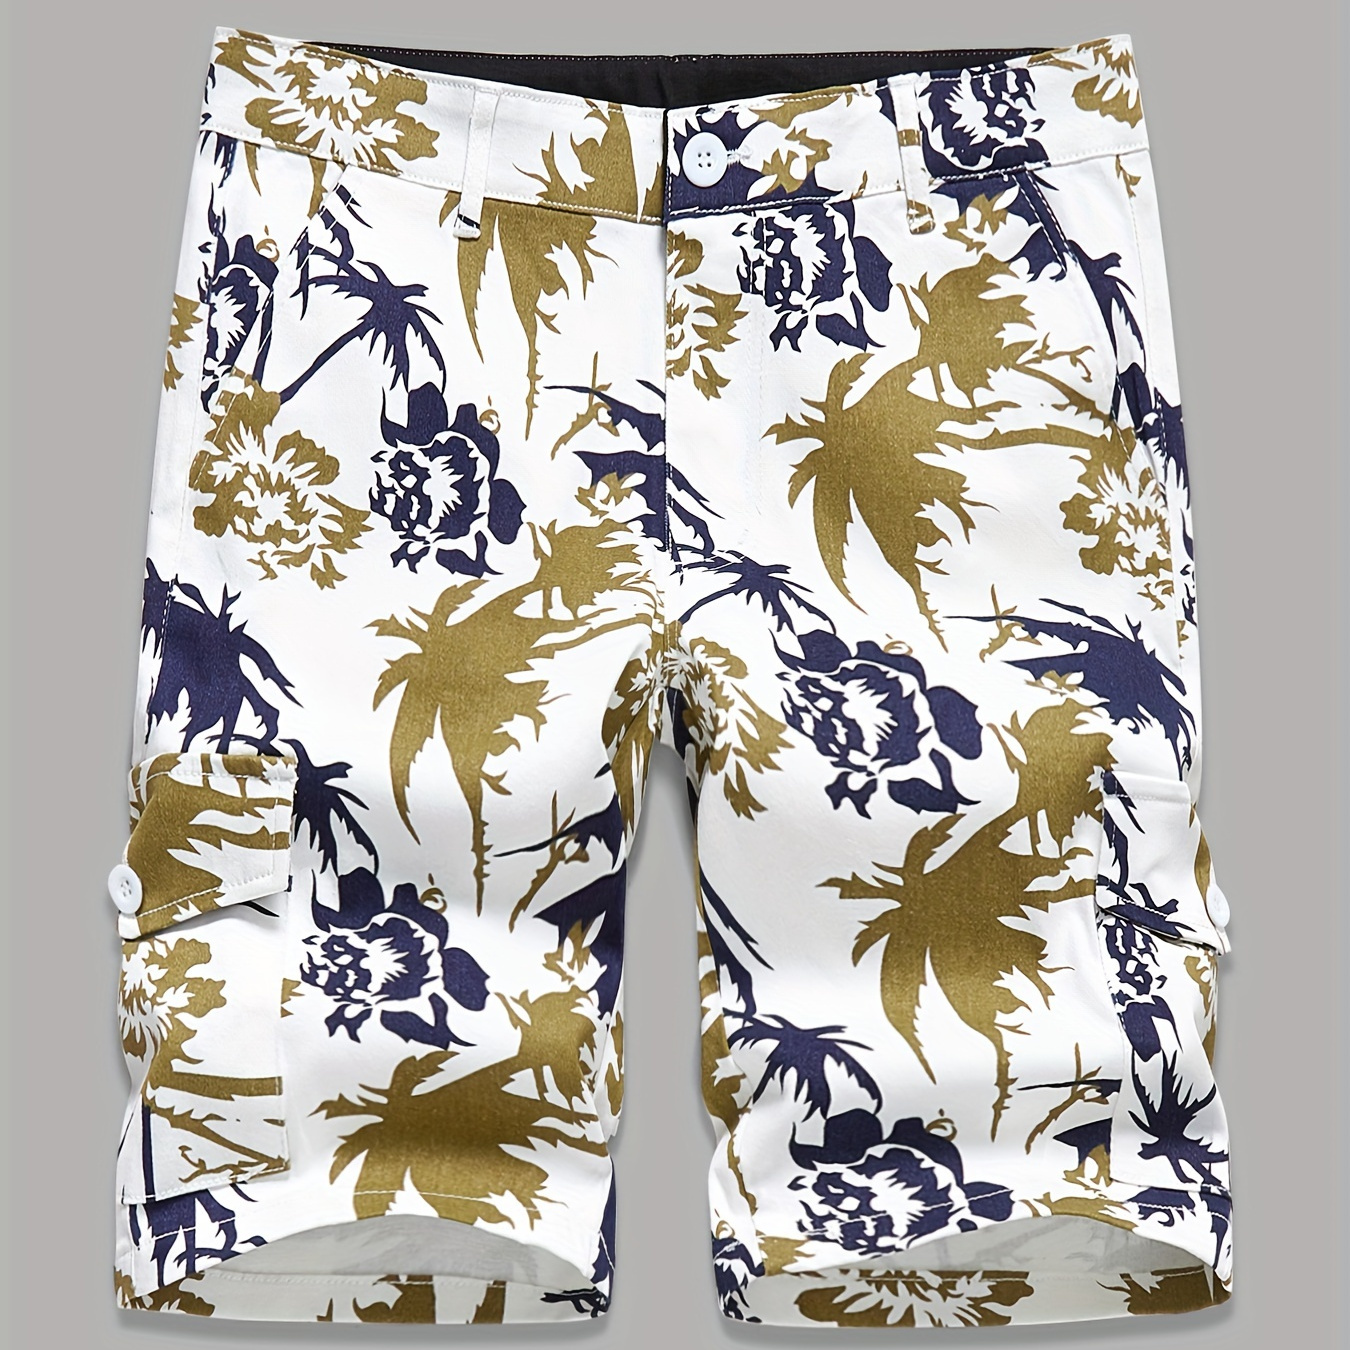 

Men's Cotton Blend Flower & Tree Leaf Print Cargo Shorts With Pockets, Fashion Multi-pocket Zip Up Shorts For Summer Outdoor